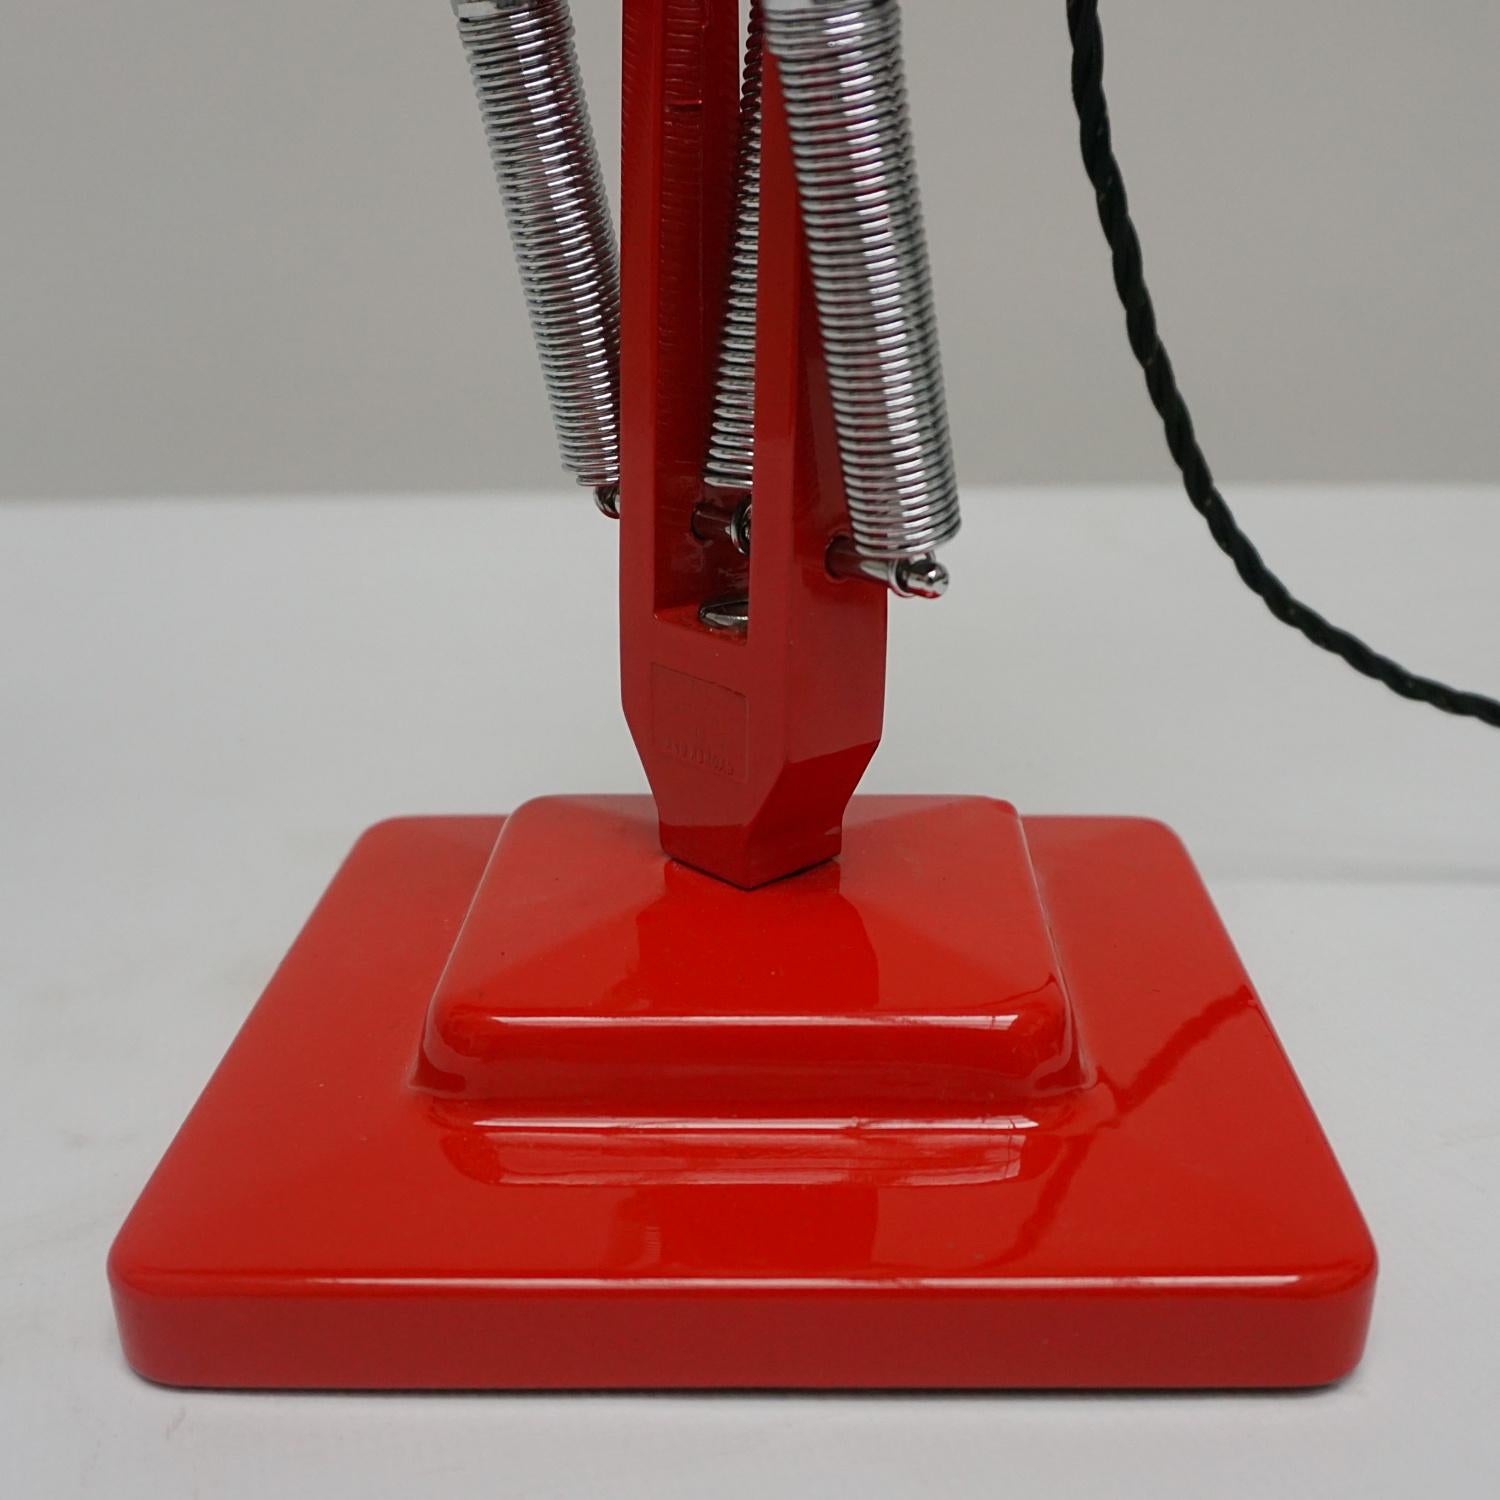 20th Century Vintage Herbert Terry & Sons Repainted Red Anglepoise Desk Lamp